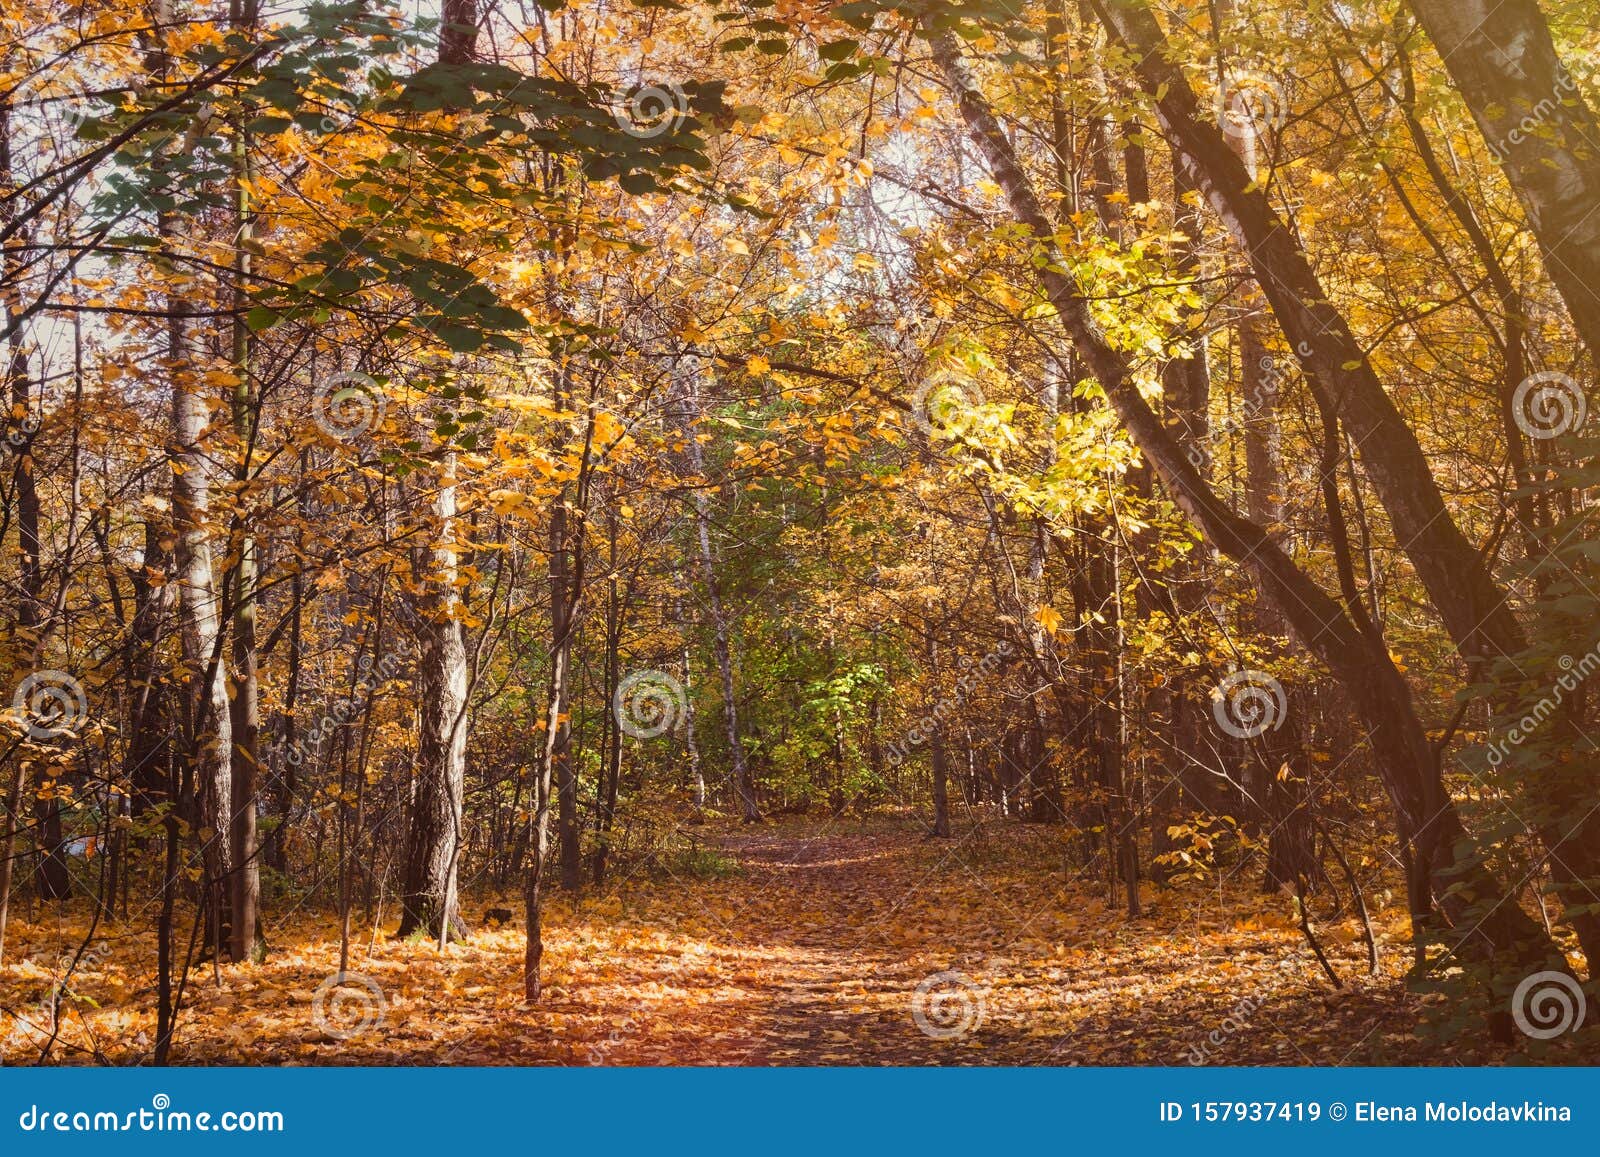 Path In Autumn Forest In Sunny Day Selective Focus Stock Image Image